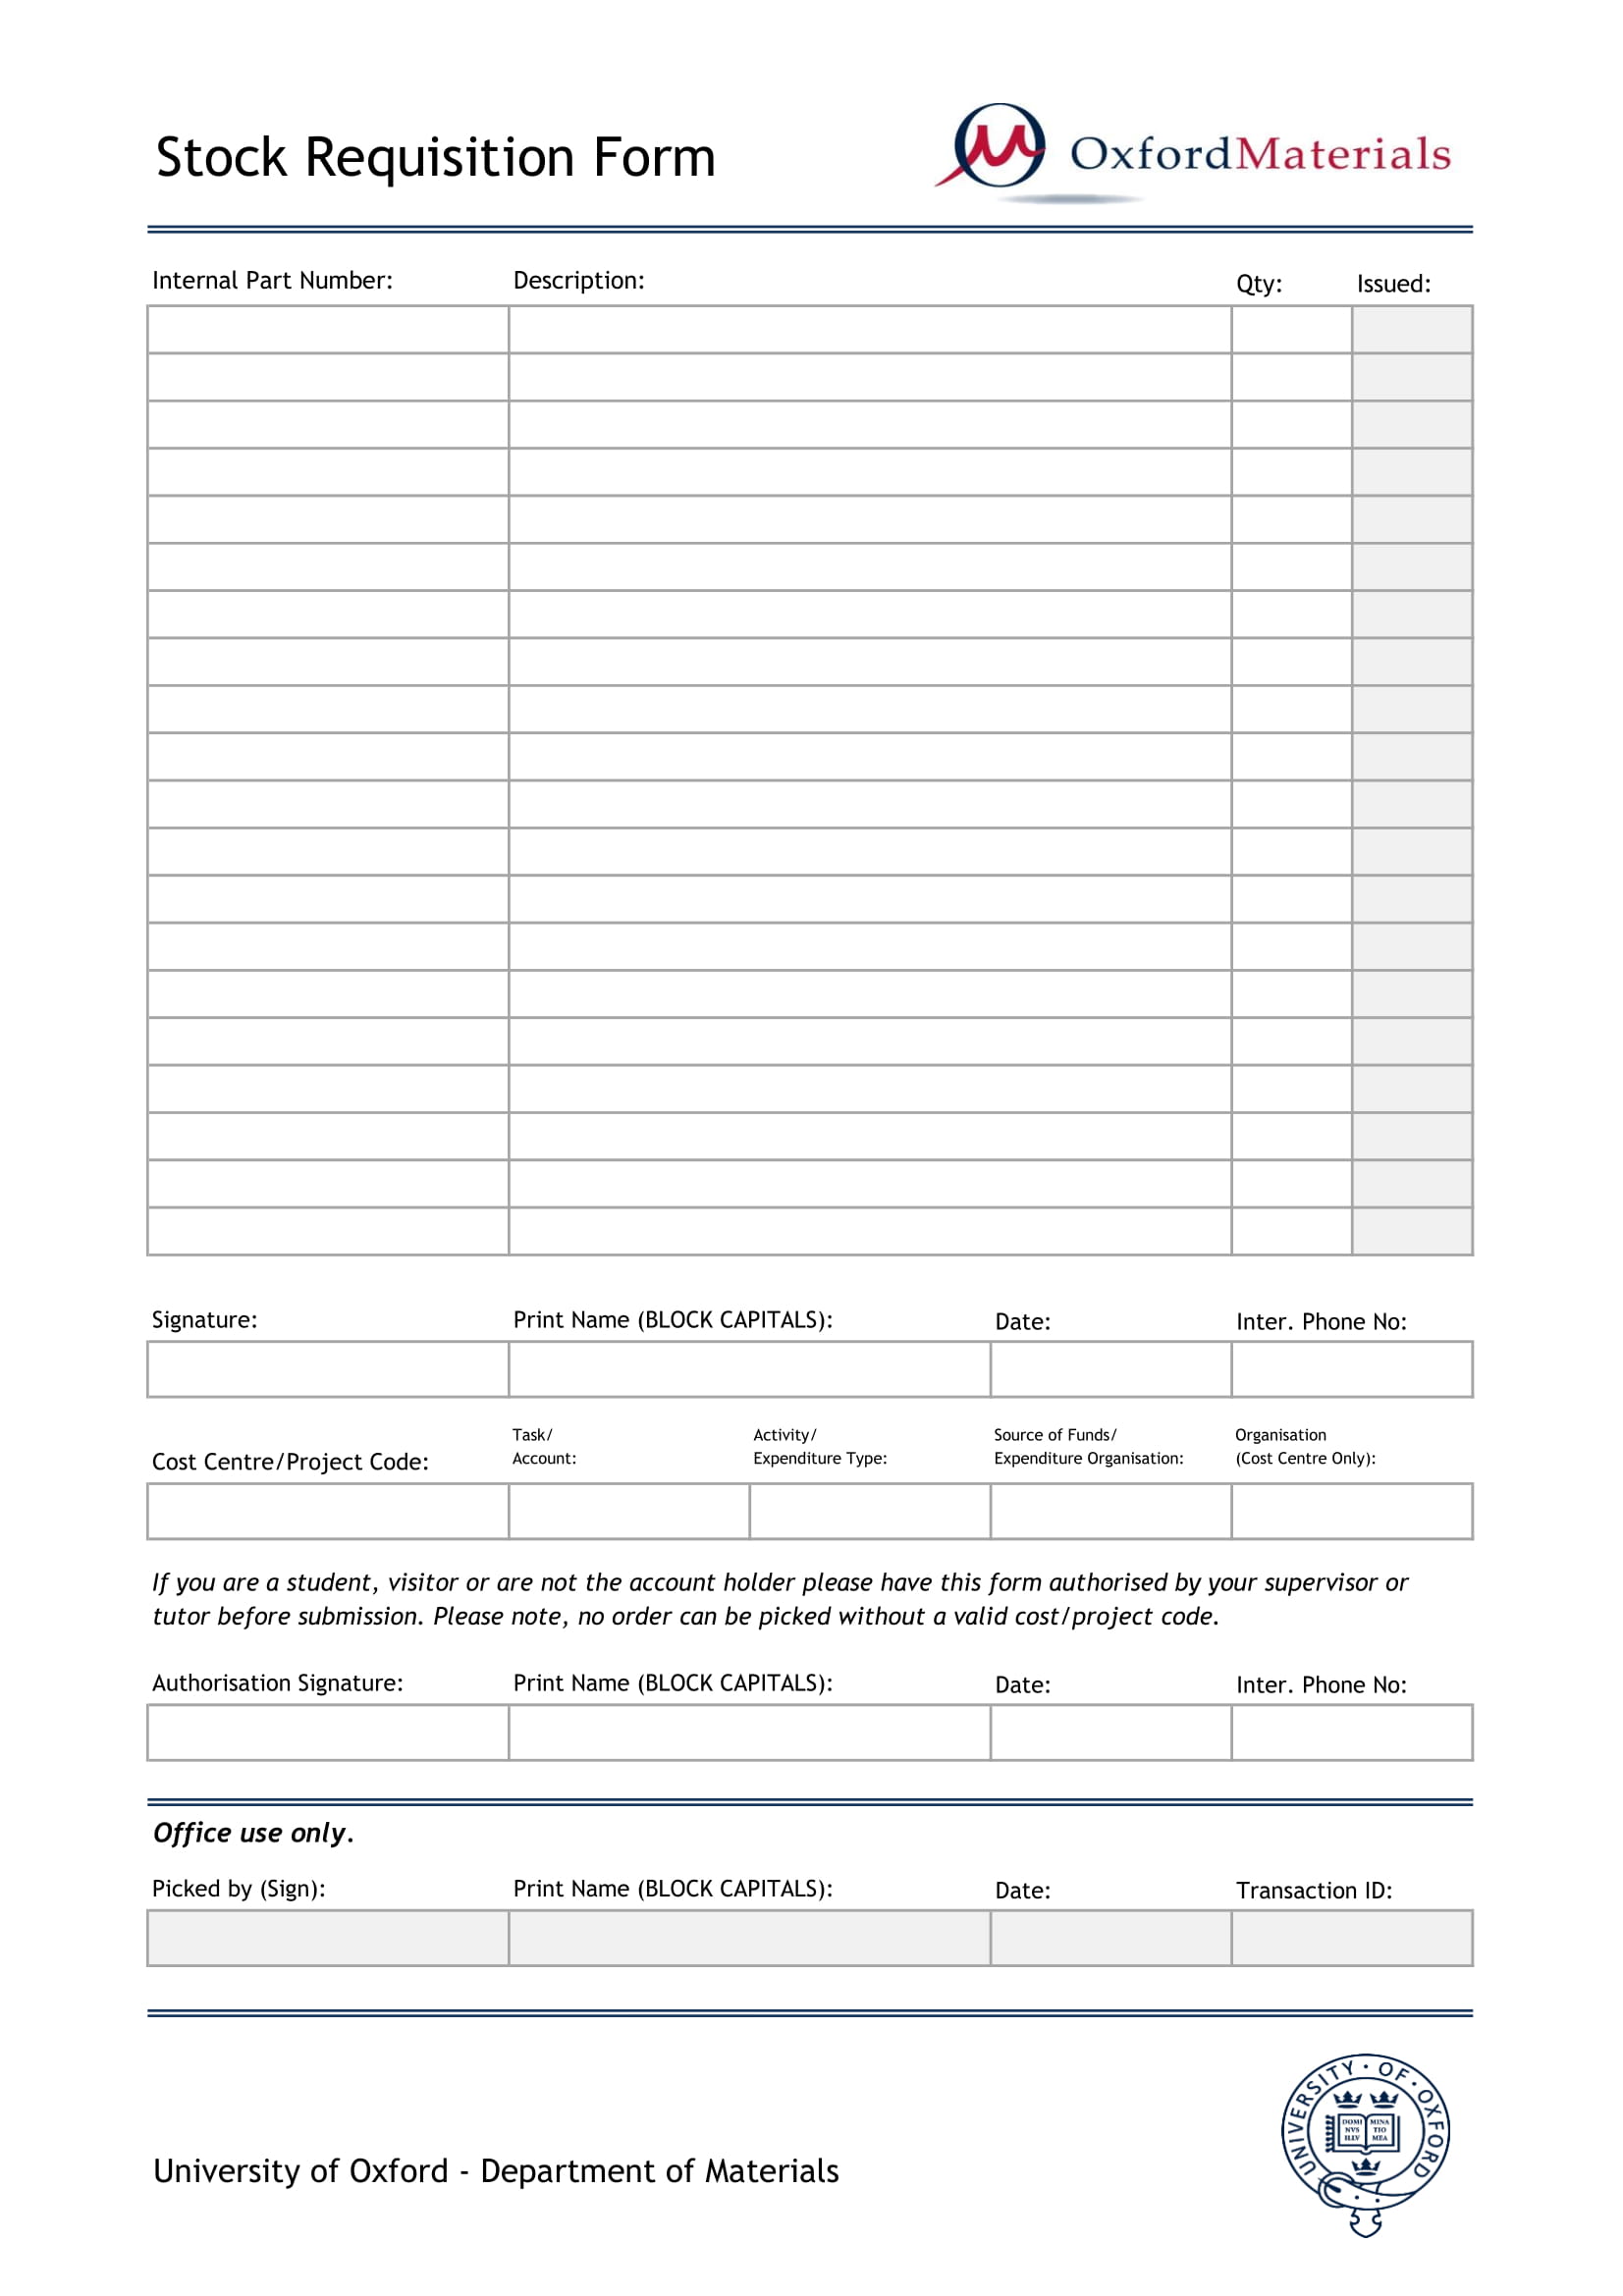 blank stock requisition form 1